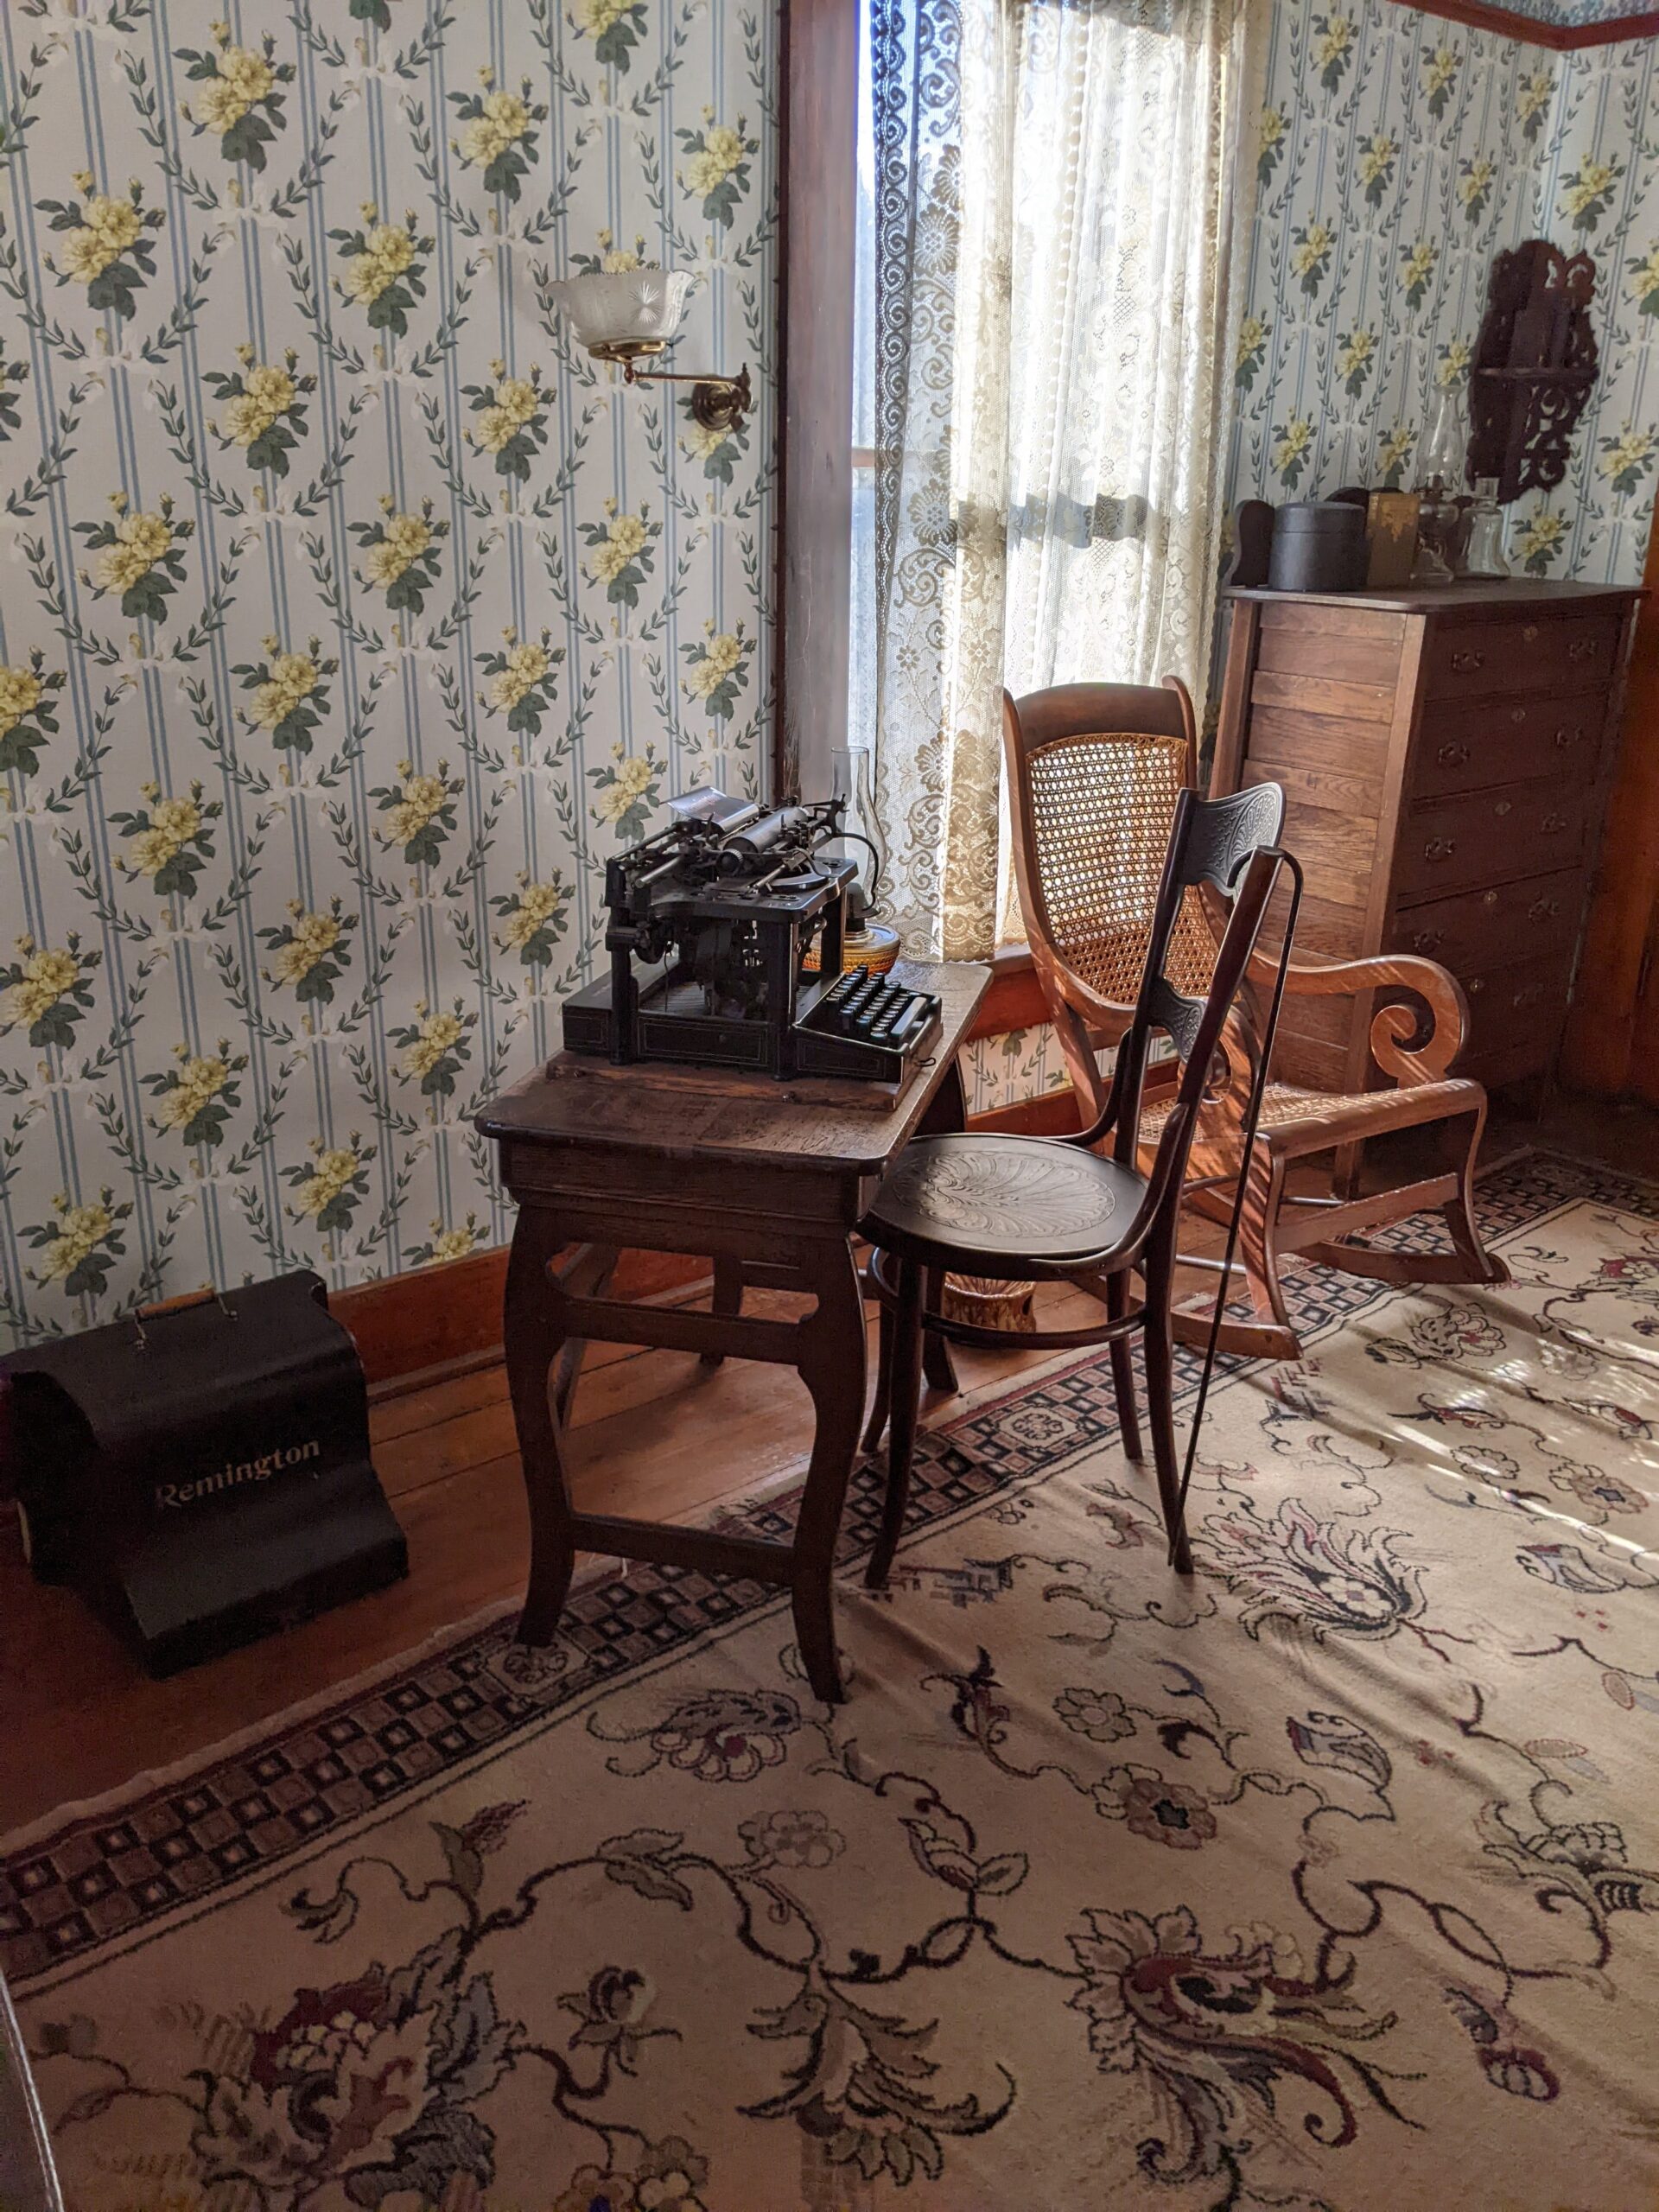 Paul Laurence Dunbar’s personal typewriter at the Dunbar home